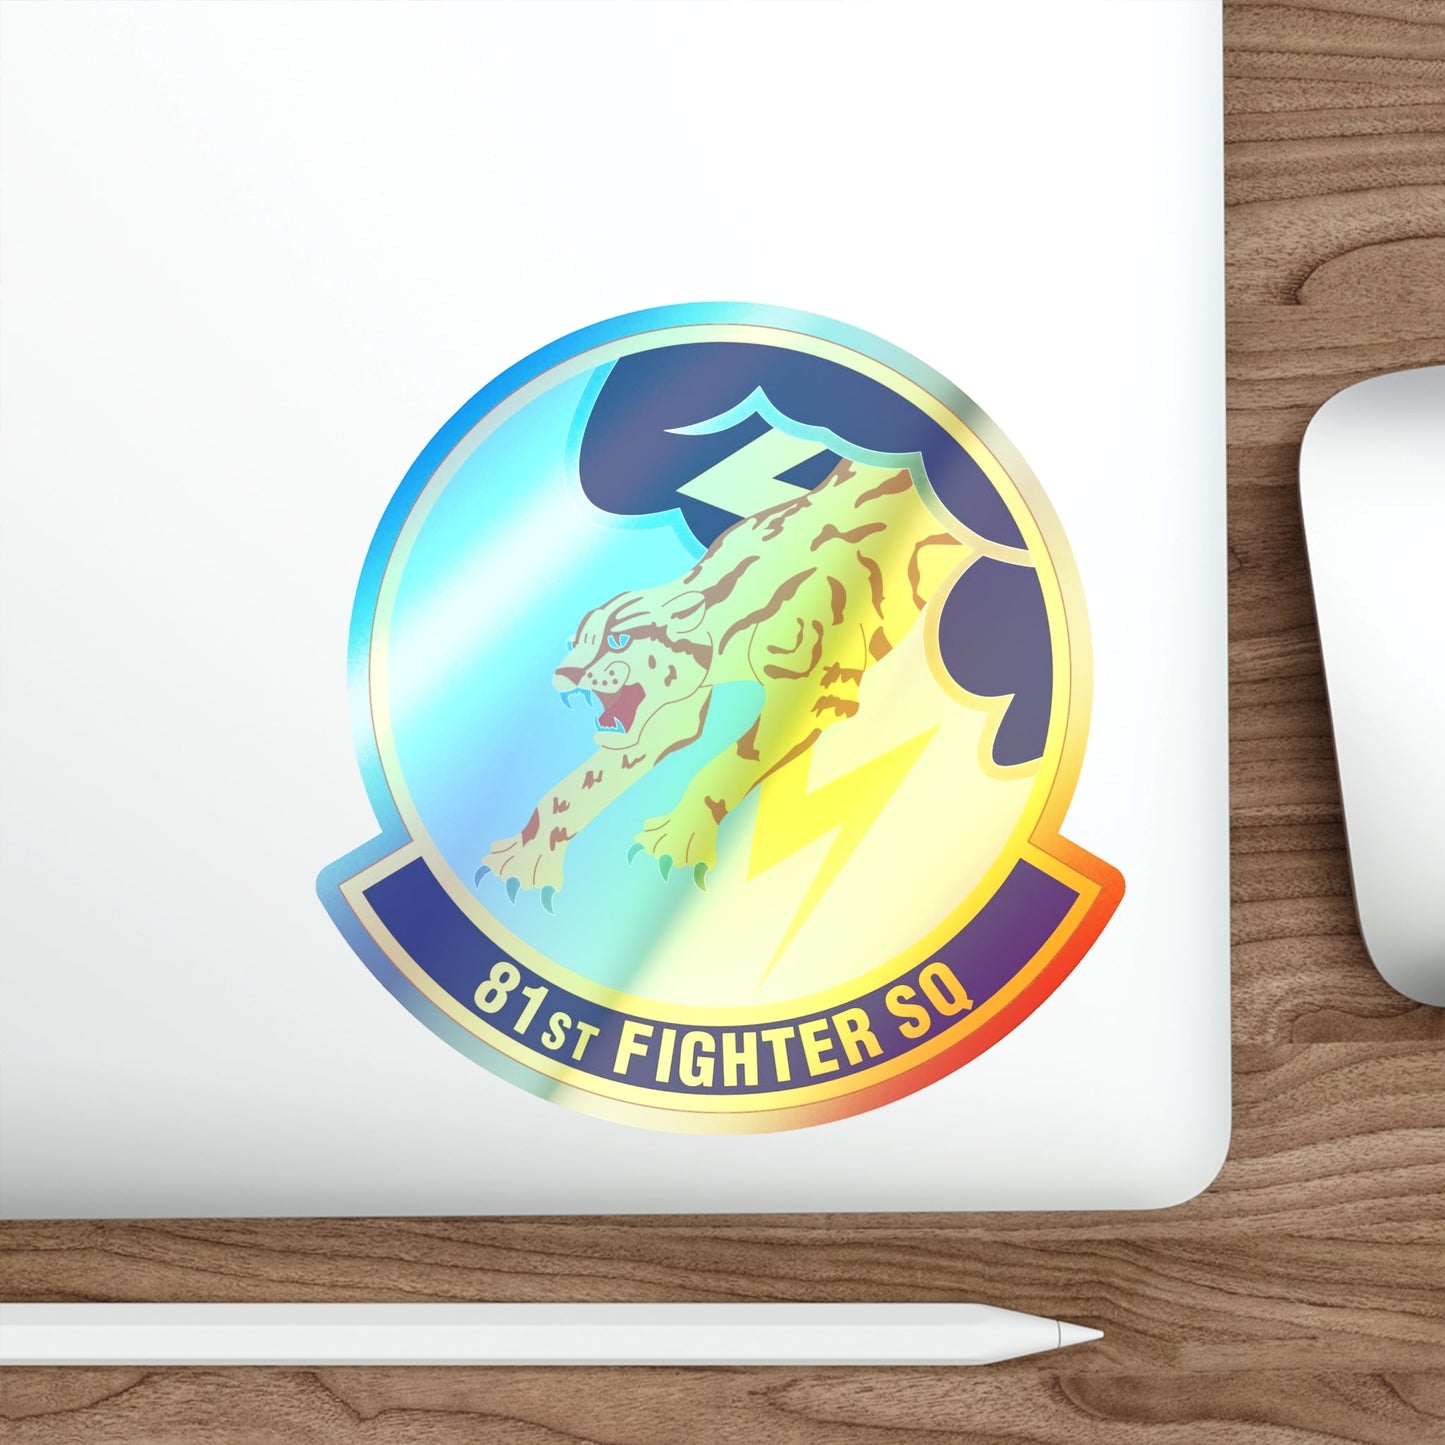 81st Fighter Squadron (U.S. Air Force) Holographic STICKER Die-Cut Vinyl Decal-The Sticker Space